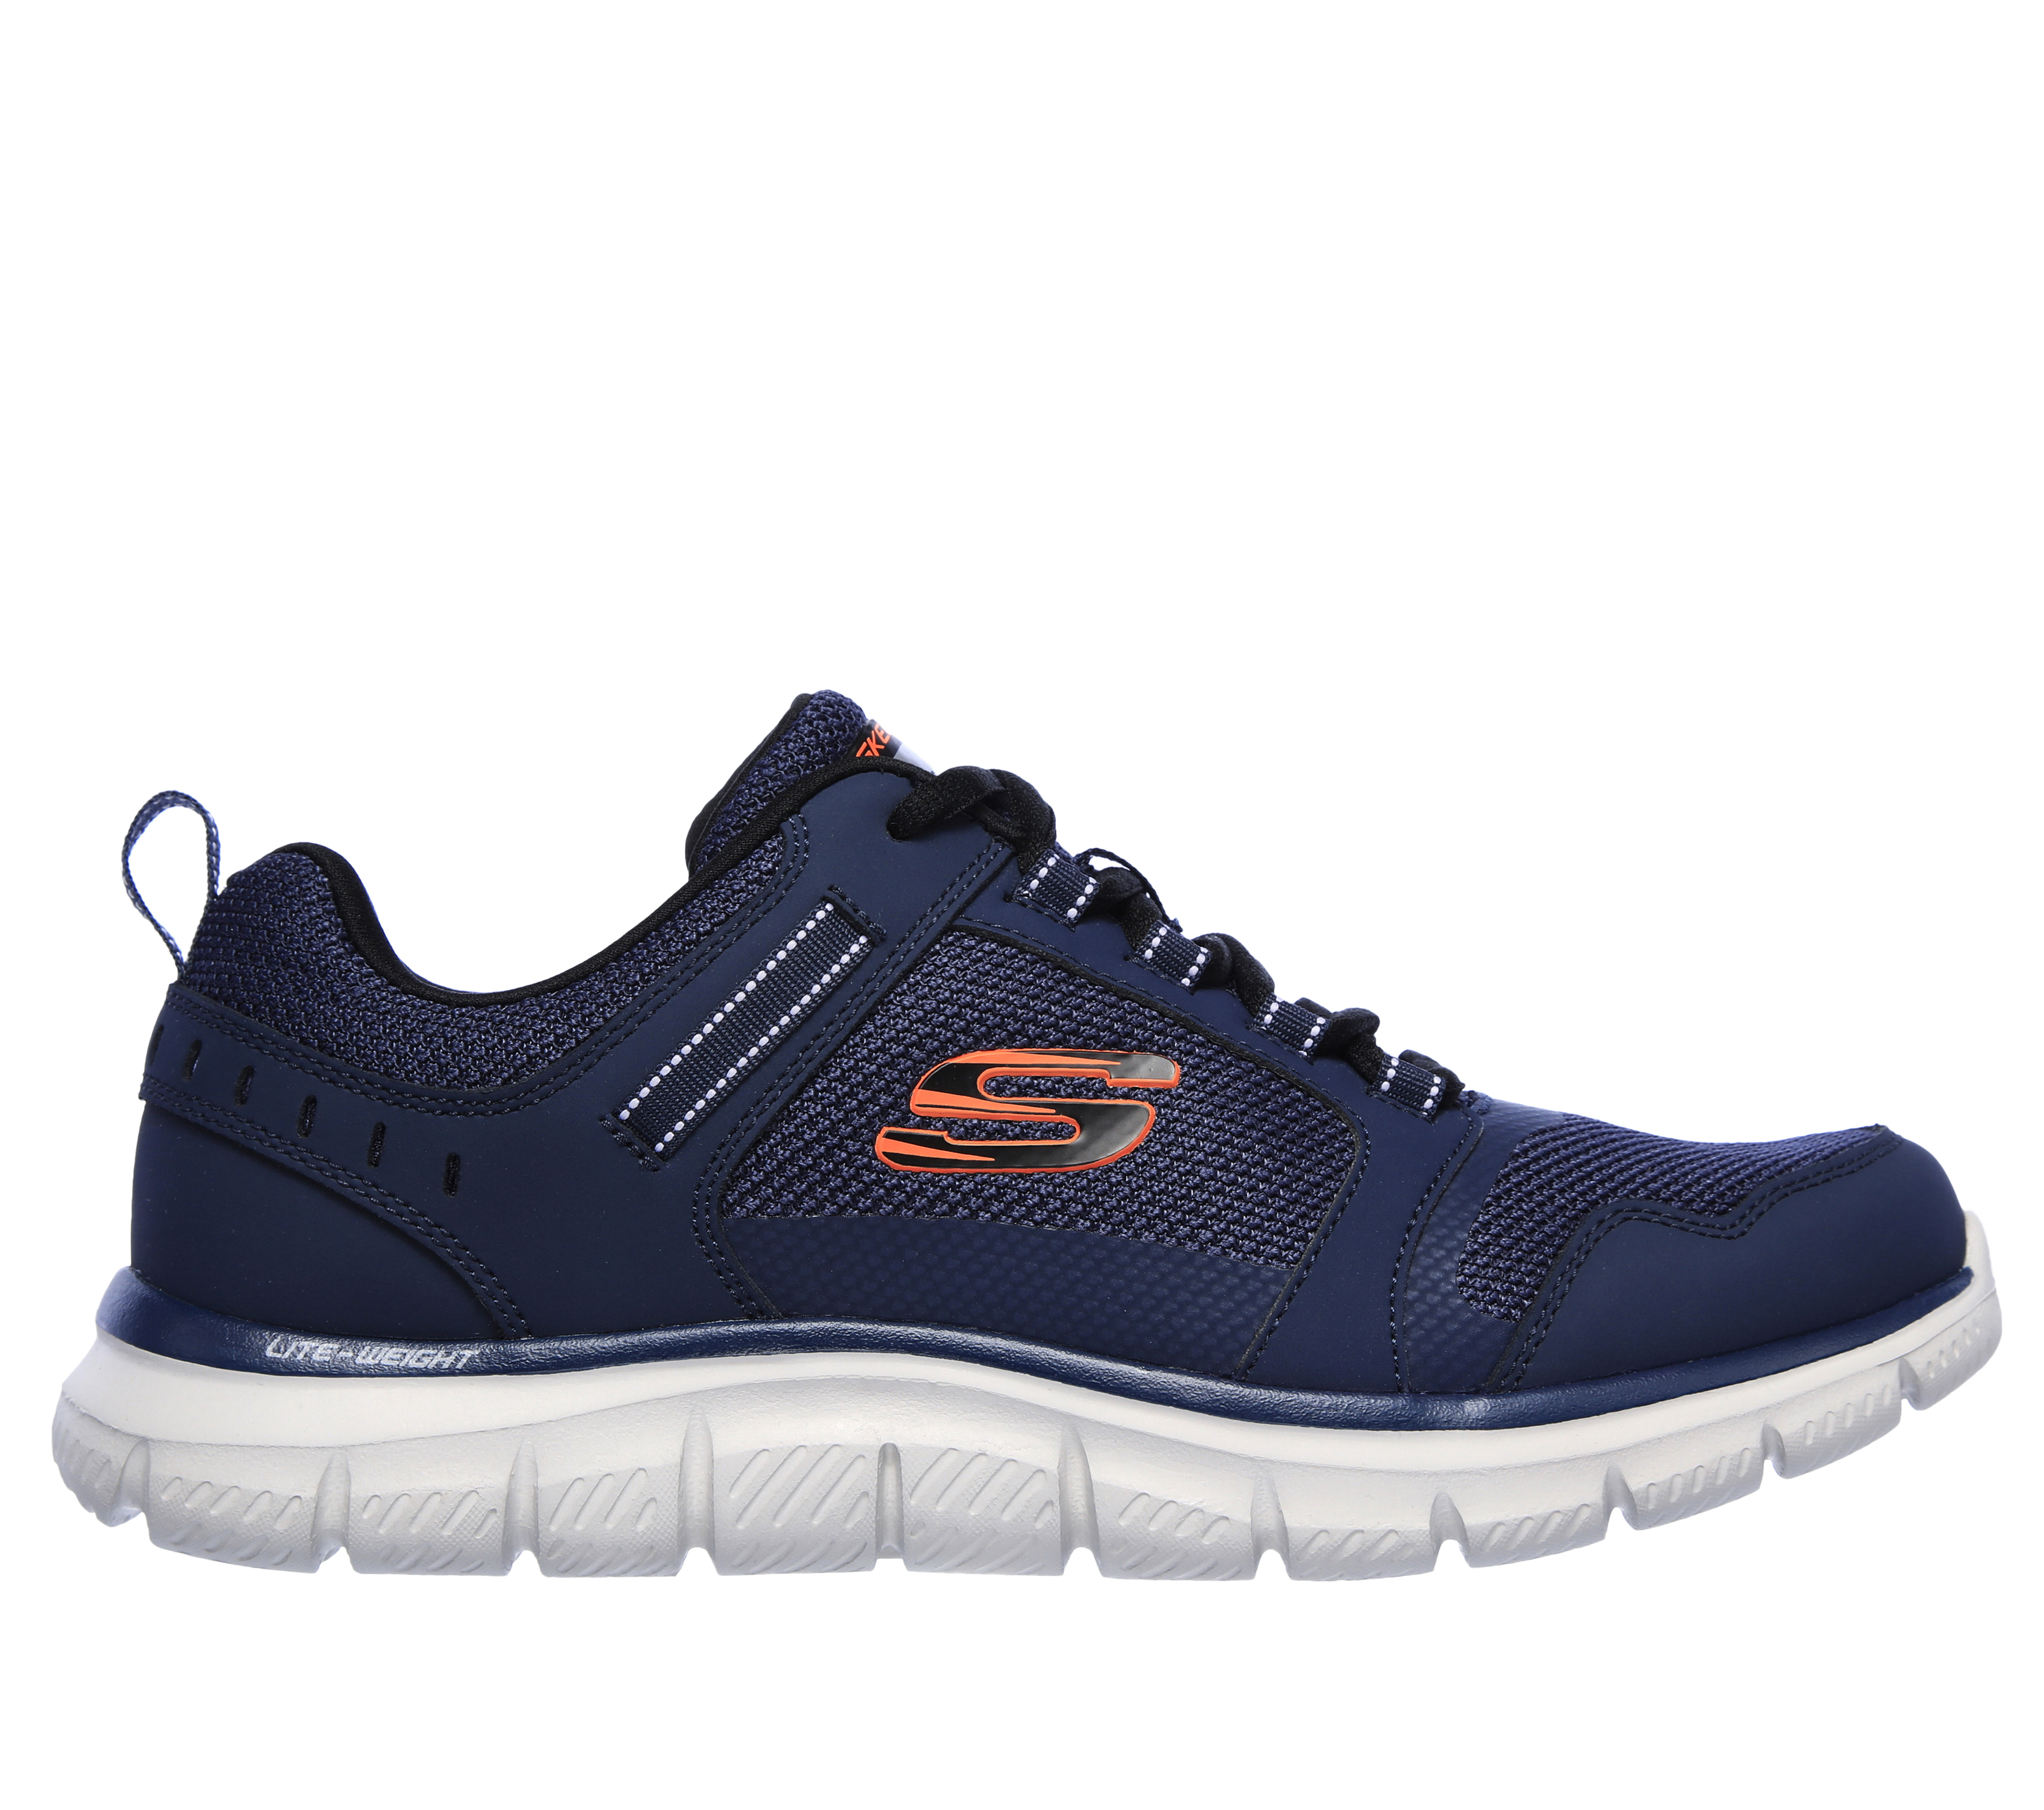 Shop the Track - Knockhill | SKECHERS